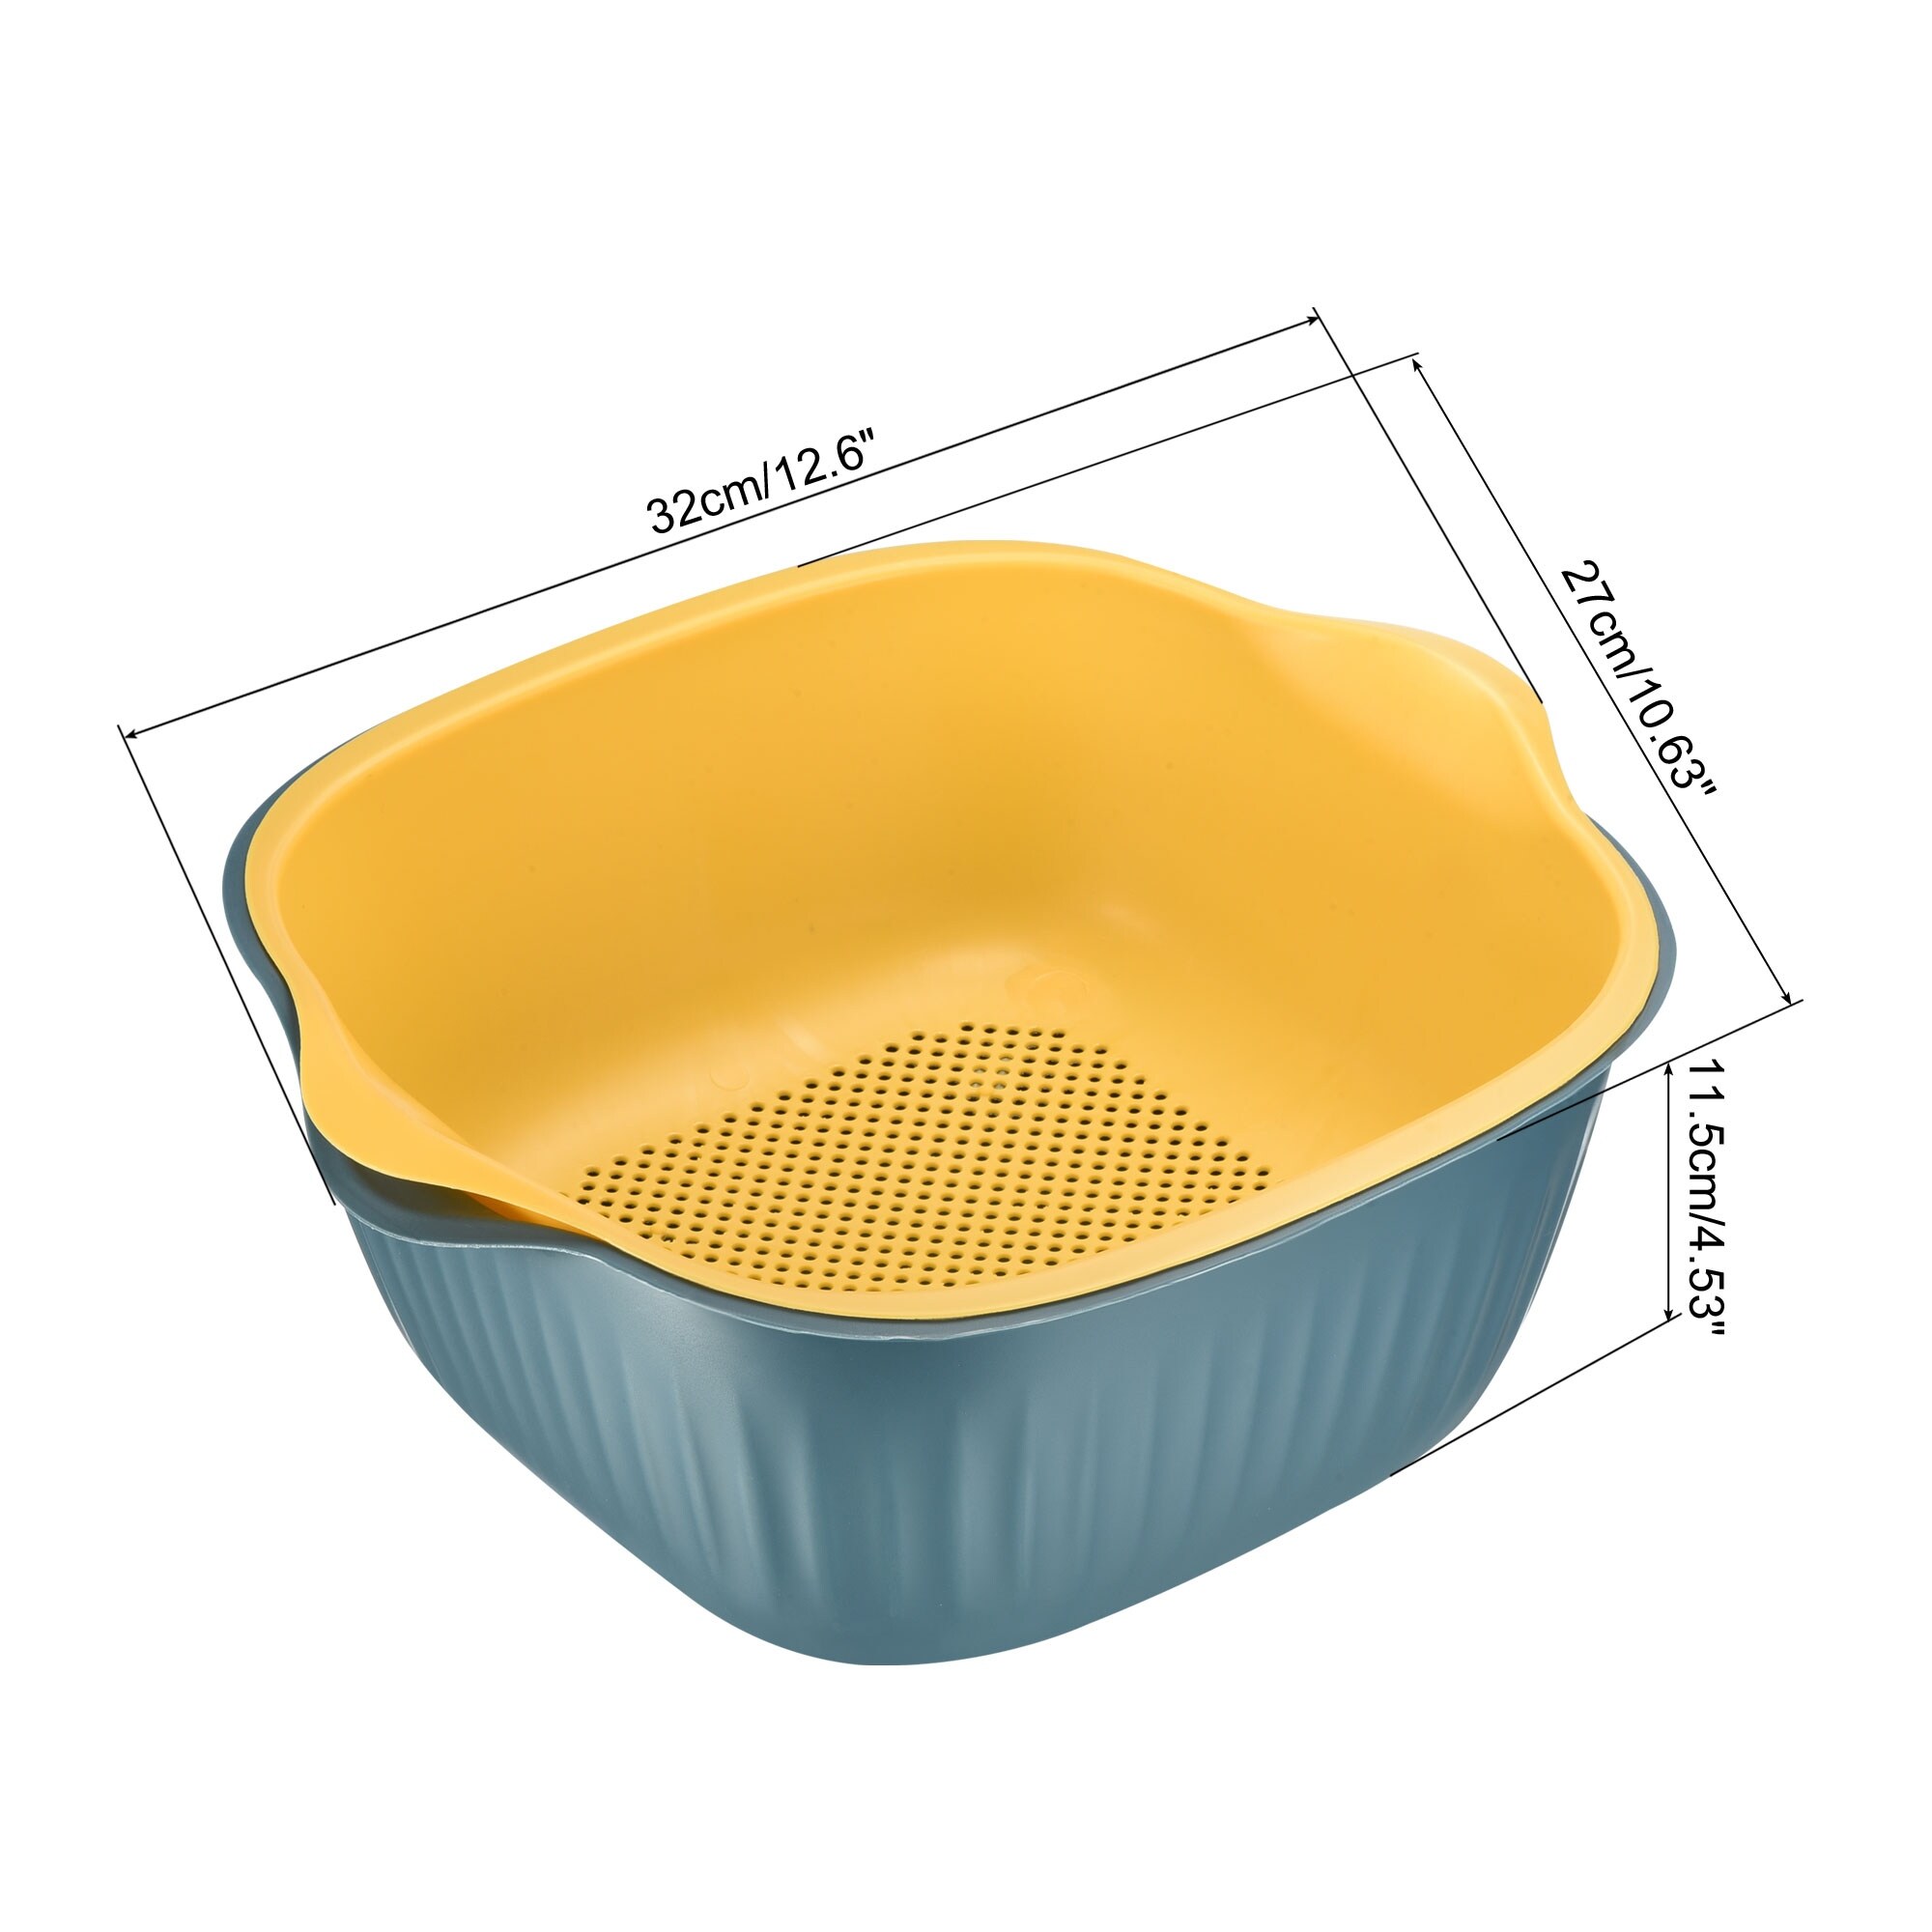 https://ak1.ostkcdn.com/images/products/is/images/direct/fad391d131e2a5b046b8cf968721688bf21d2977/Kitchen-Food-Strainer-Colander-Bowl-Sets%2C-Plastic-Washing-Bowl-and-Str.jpg